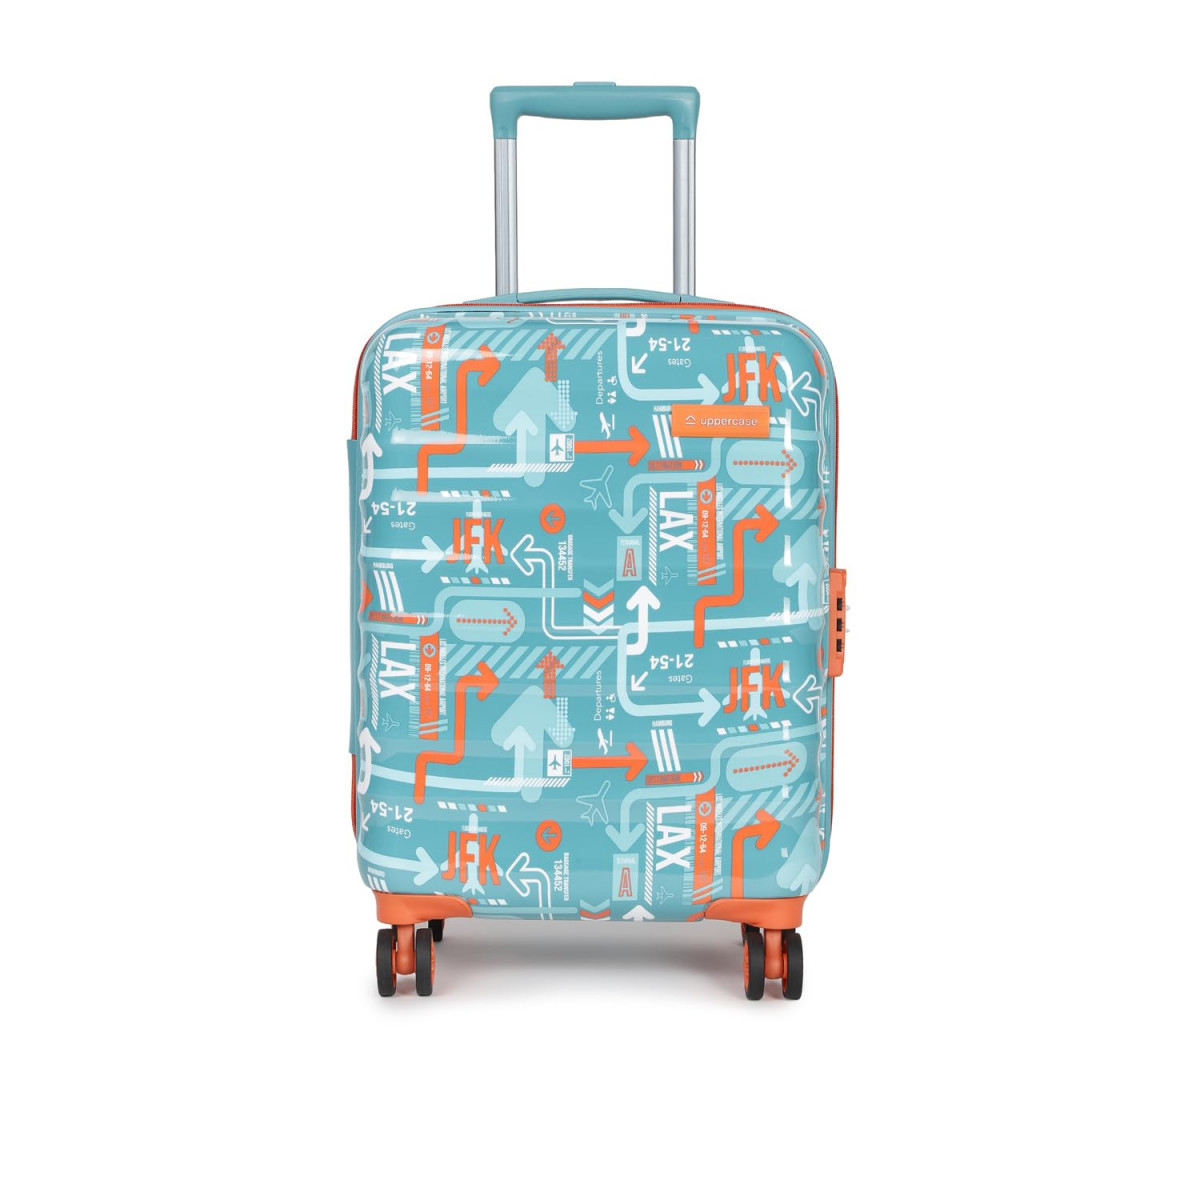 uppercase JFK Plus Small 56cms  Sustainable Cabin Trolley Bag  Hardsided Printed Luggage  Combination Lock  8 Wheel Suitcase for Men  Women  2000 Days Warranty Teal Blue